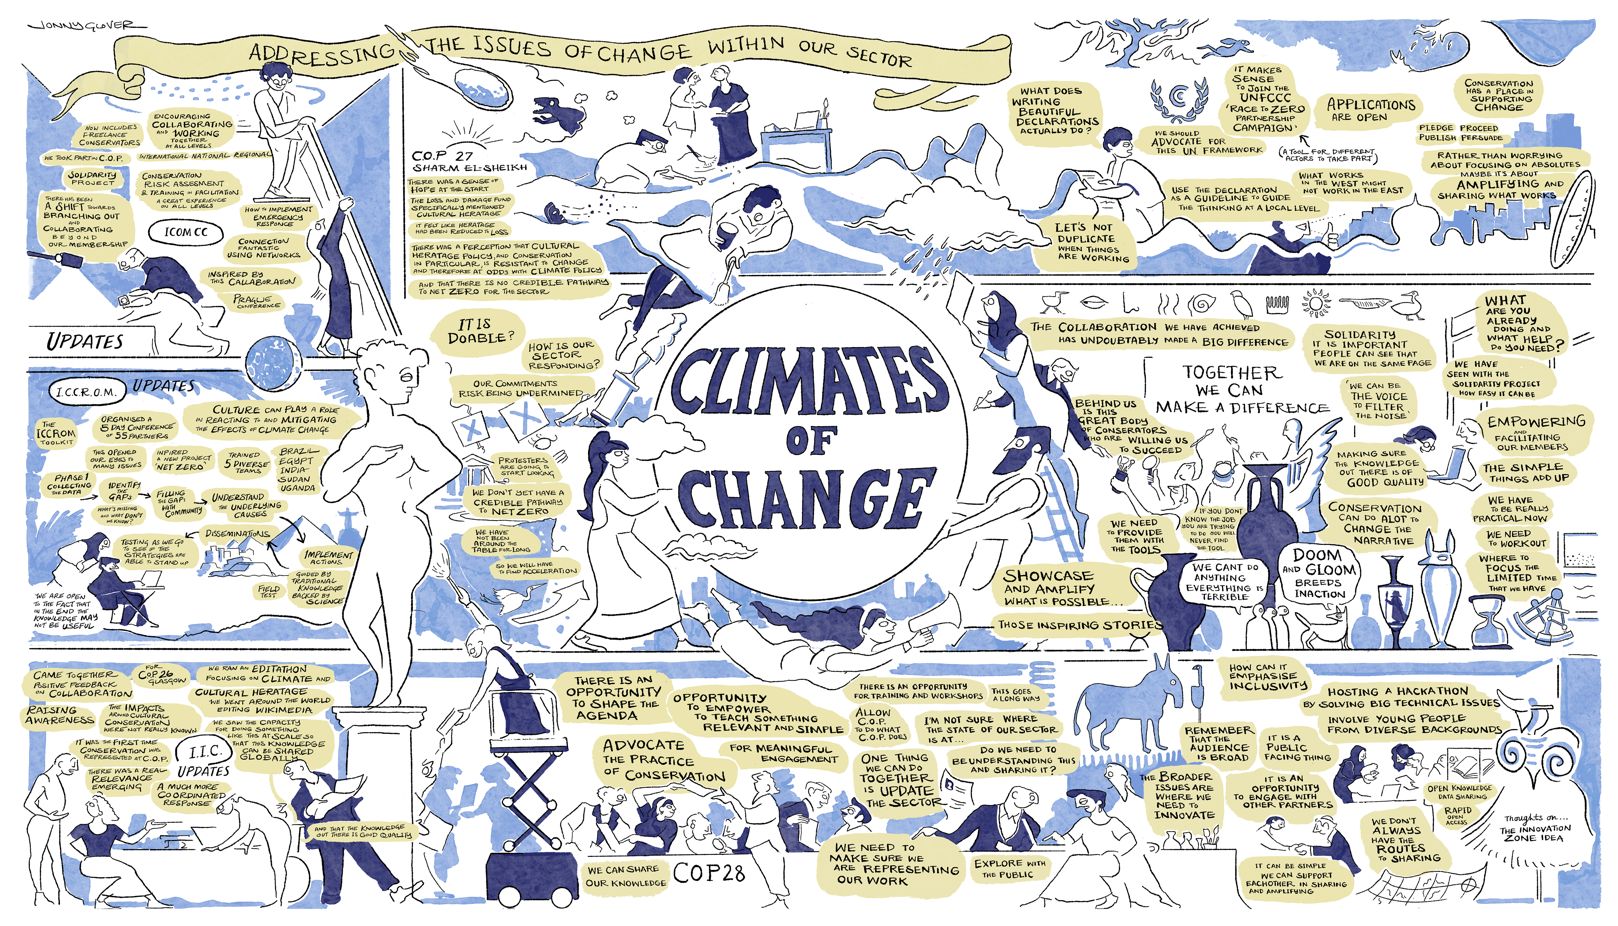 Visual minutes of the Climates of Change Roundtable. © International Institute for Conservation. Drawn by Jonny Glover: www.jonnyglover.com